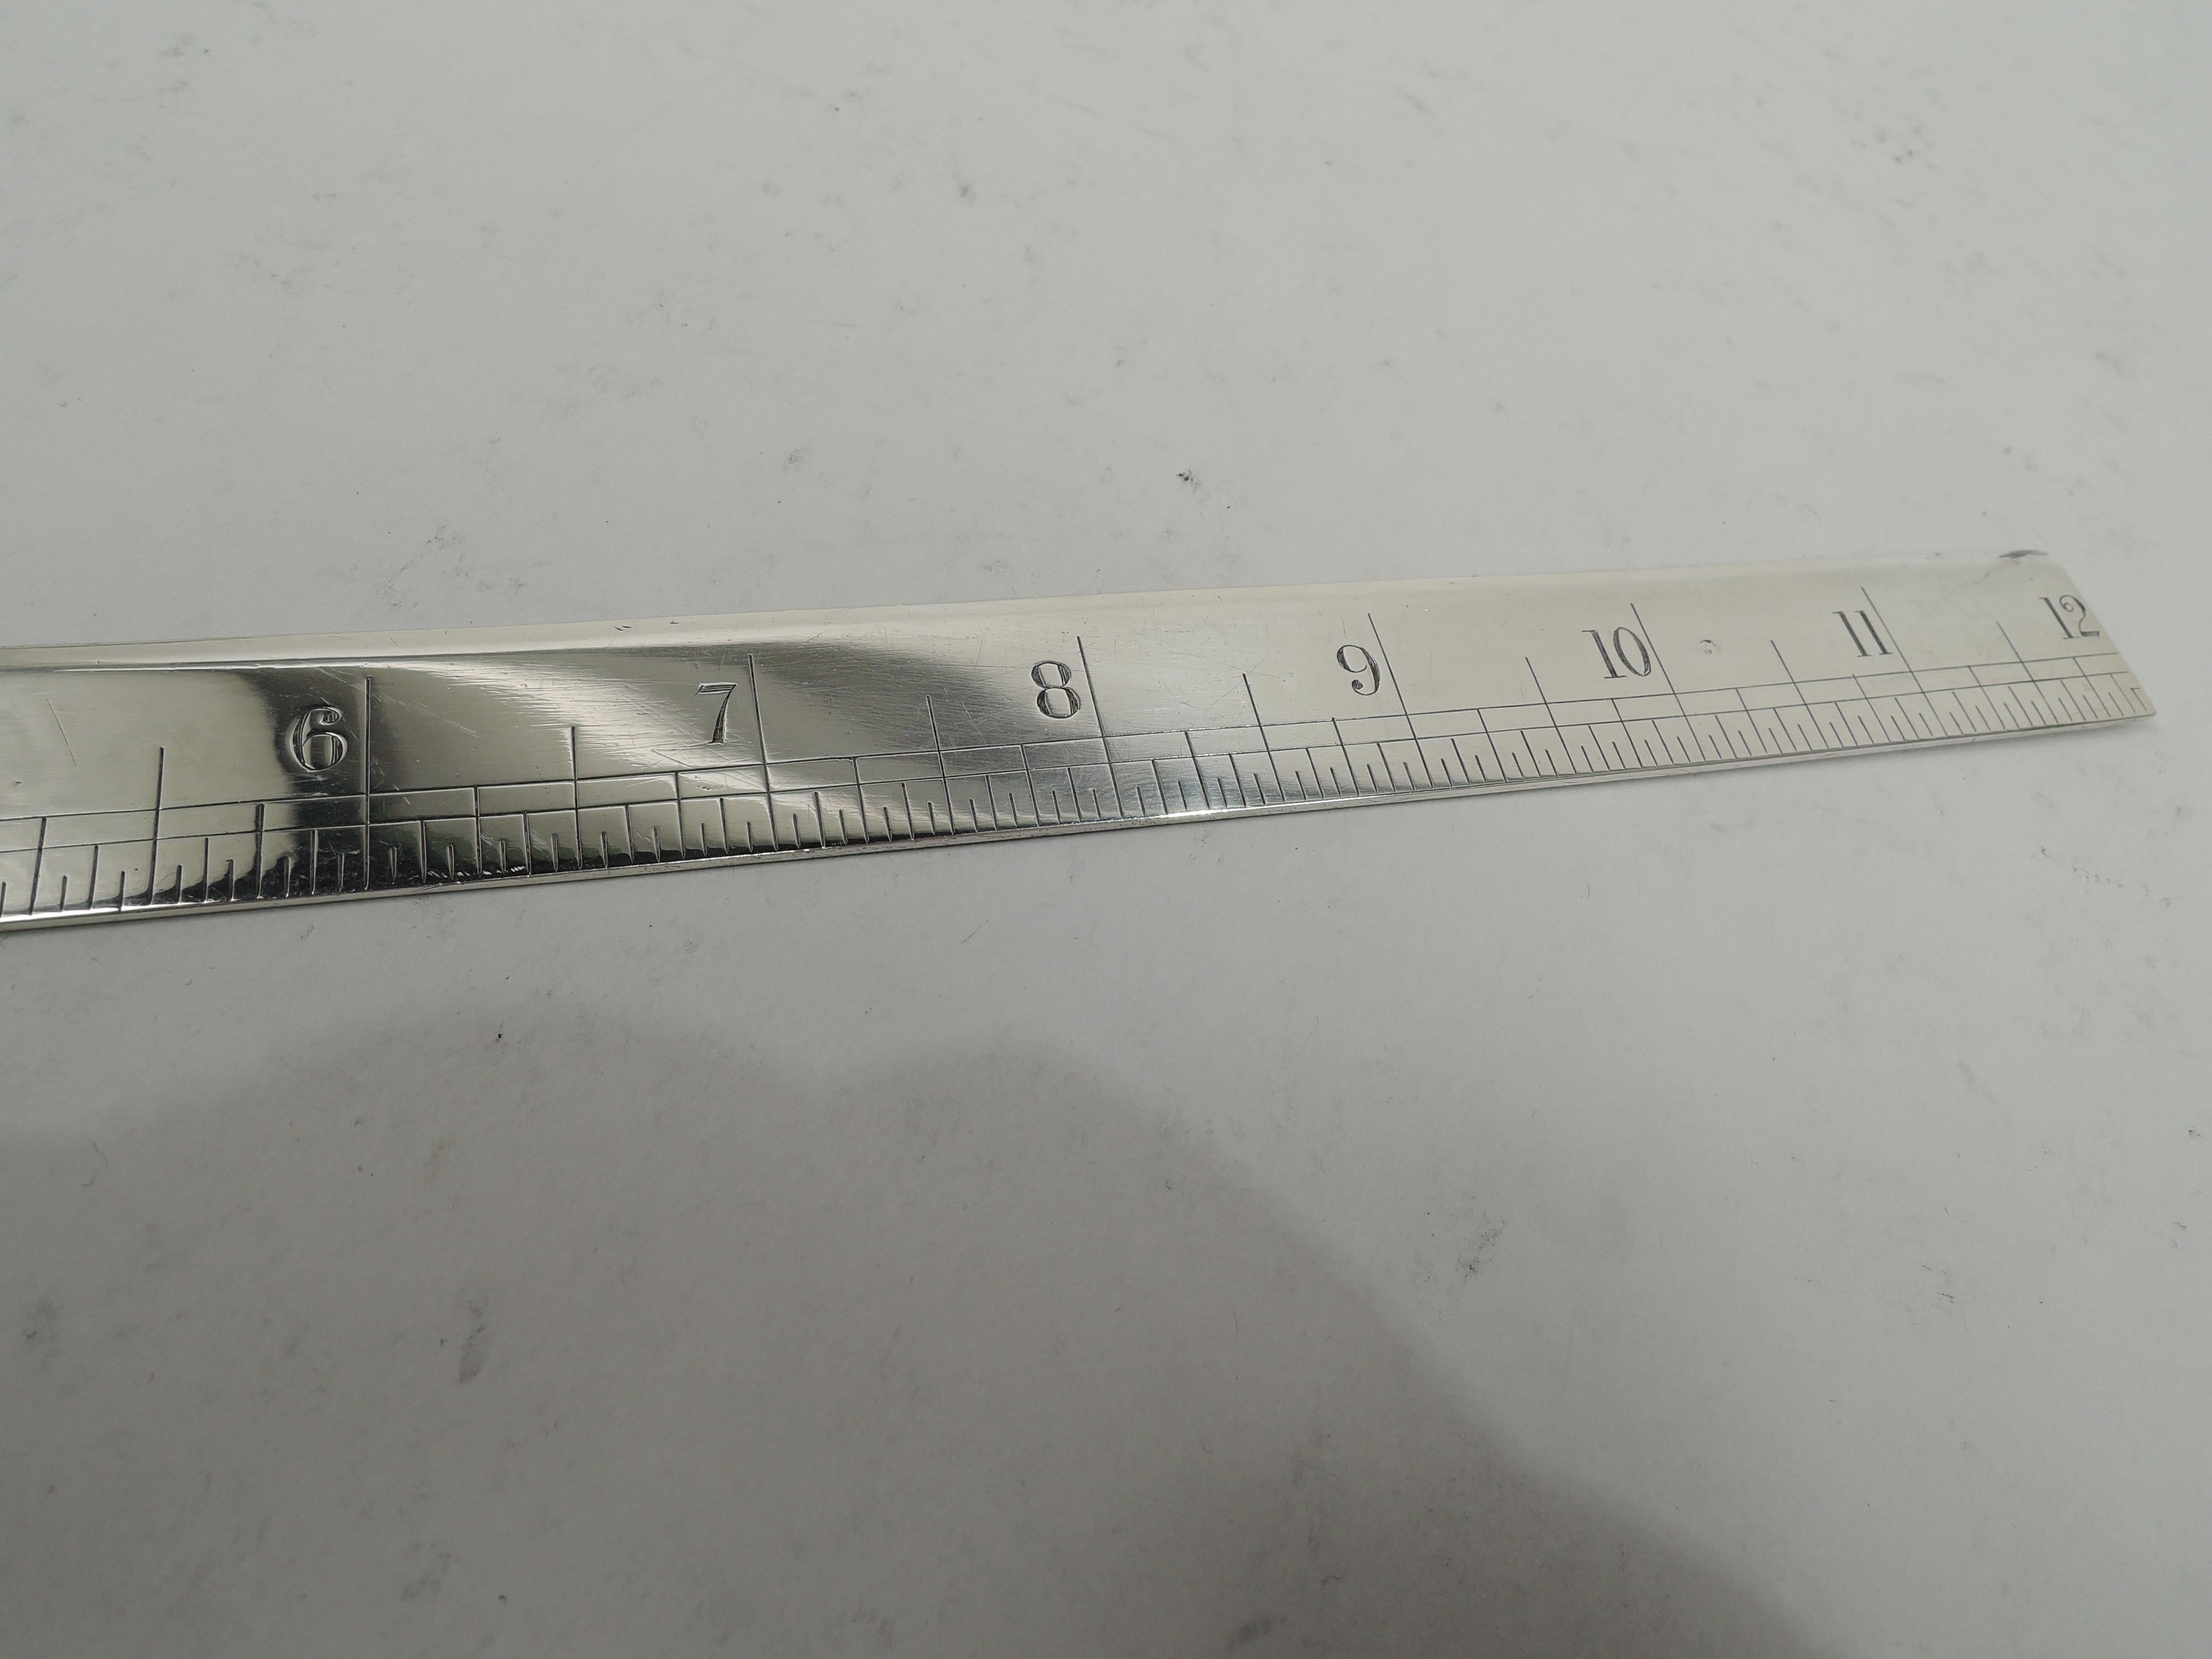 4.72 inches on a ruler